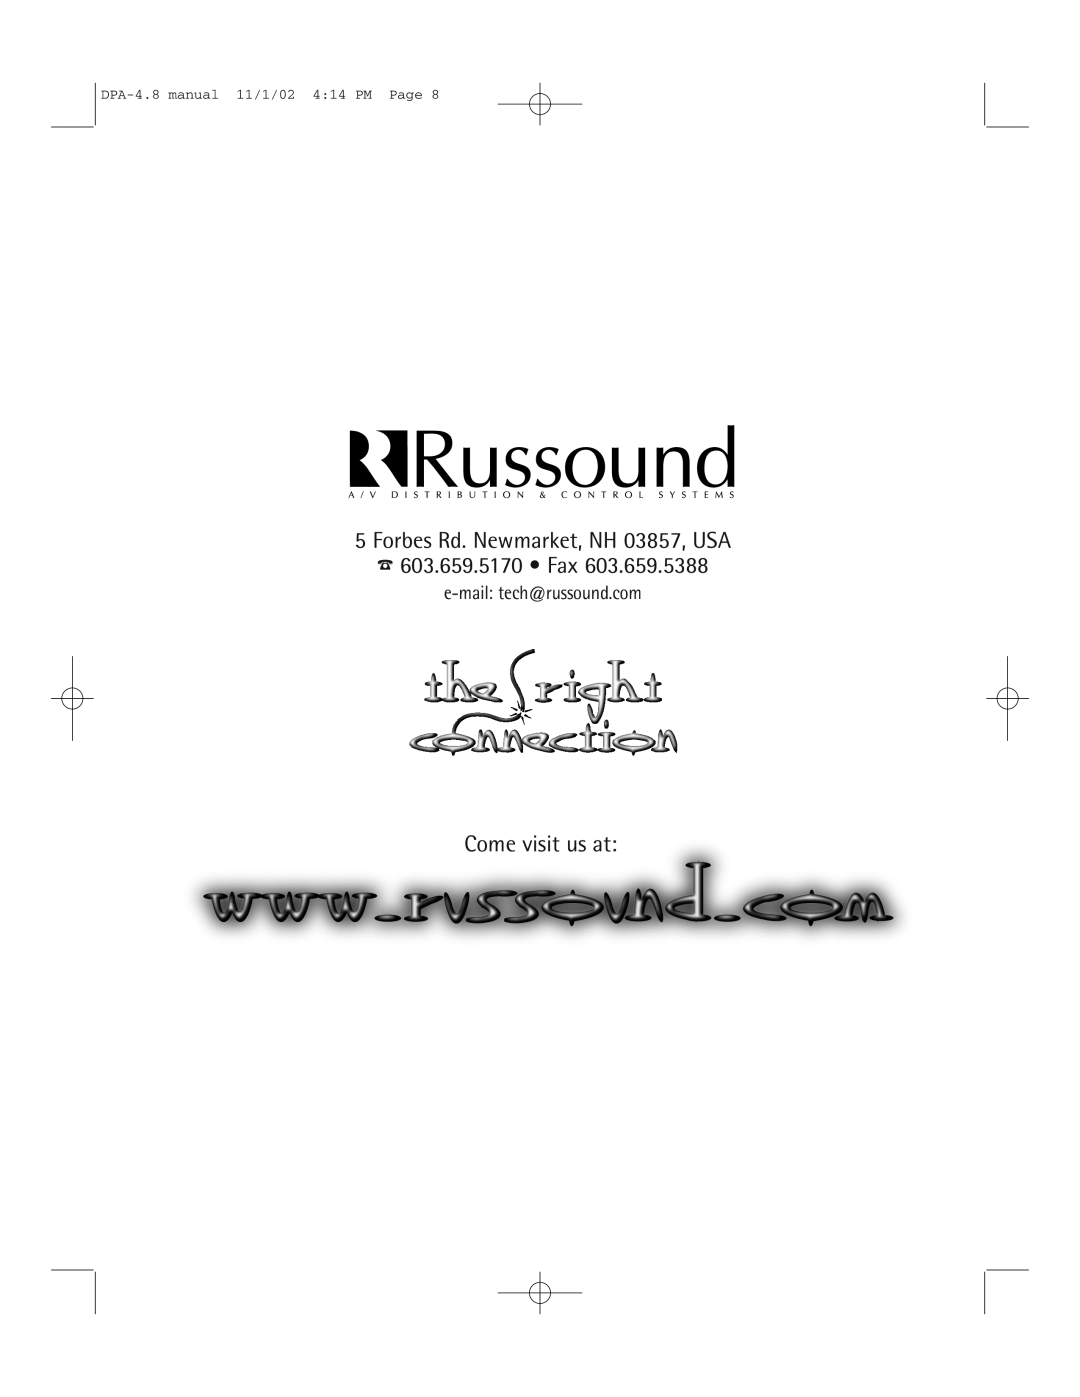 Russound DPA-4.8 instruction manual Forbes Rd. Newmarket, NH 03857, USA, 603.659.5170 Fax, Come visit us at 